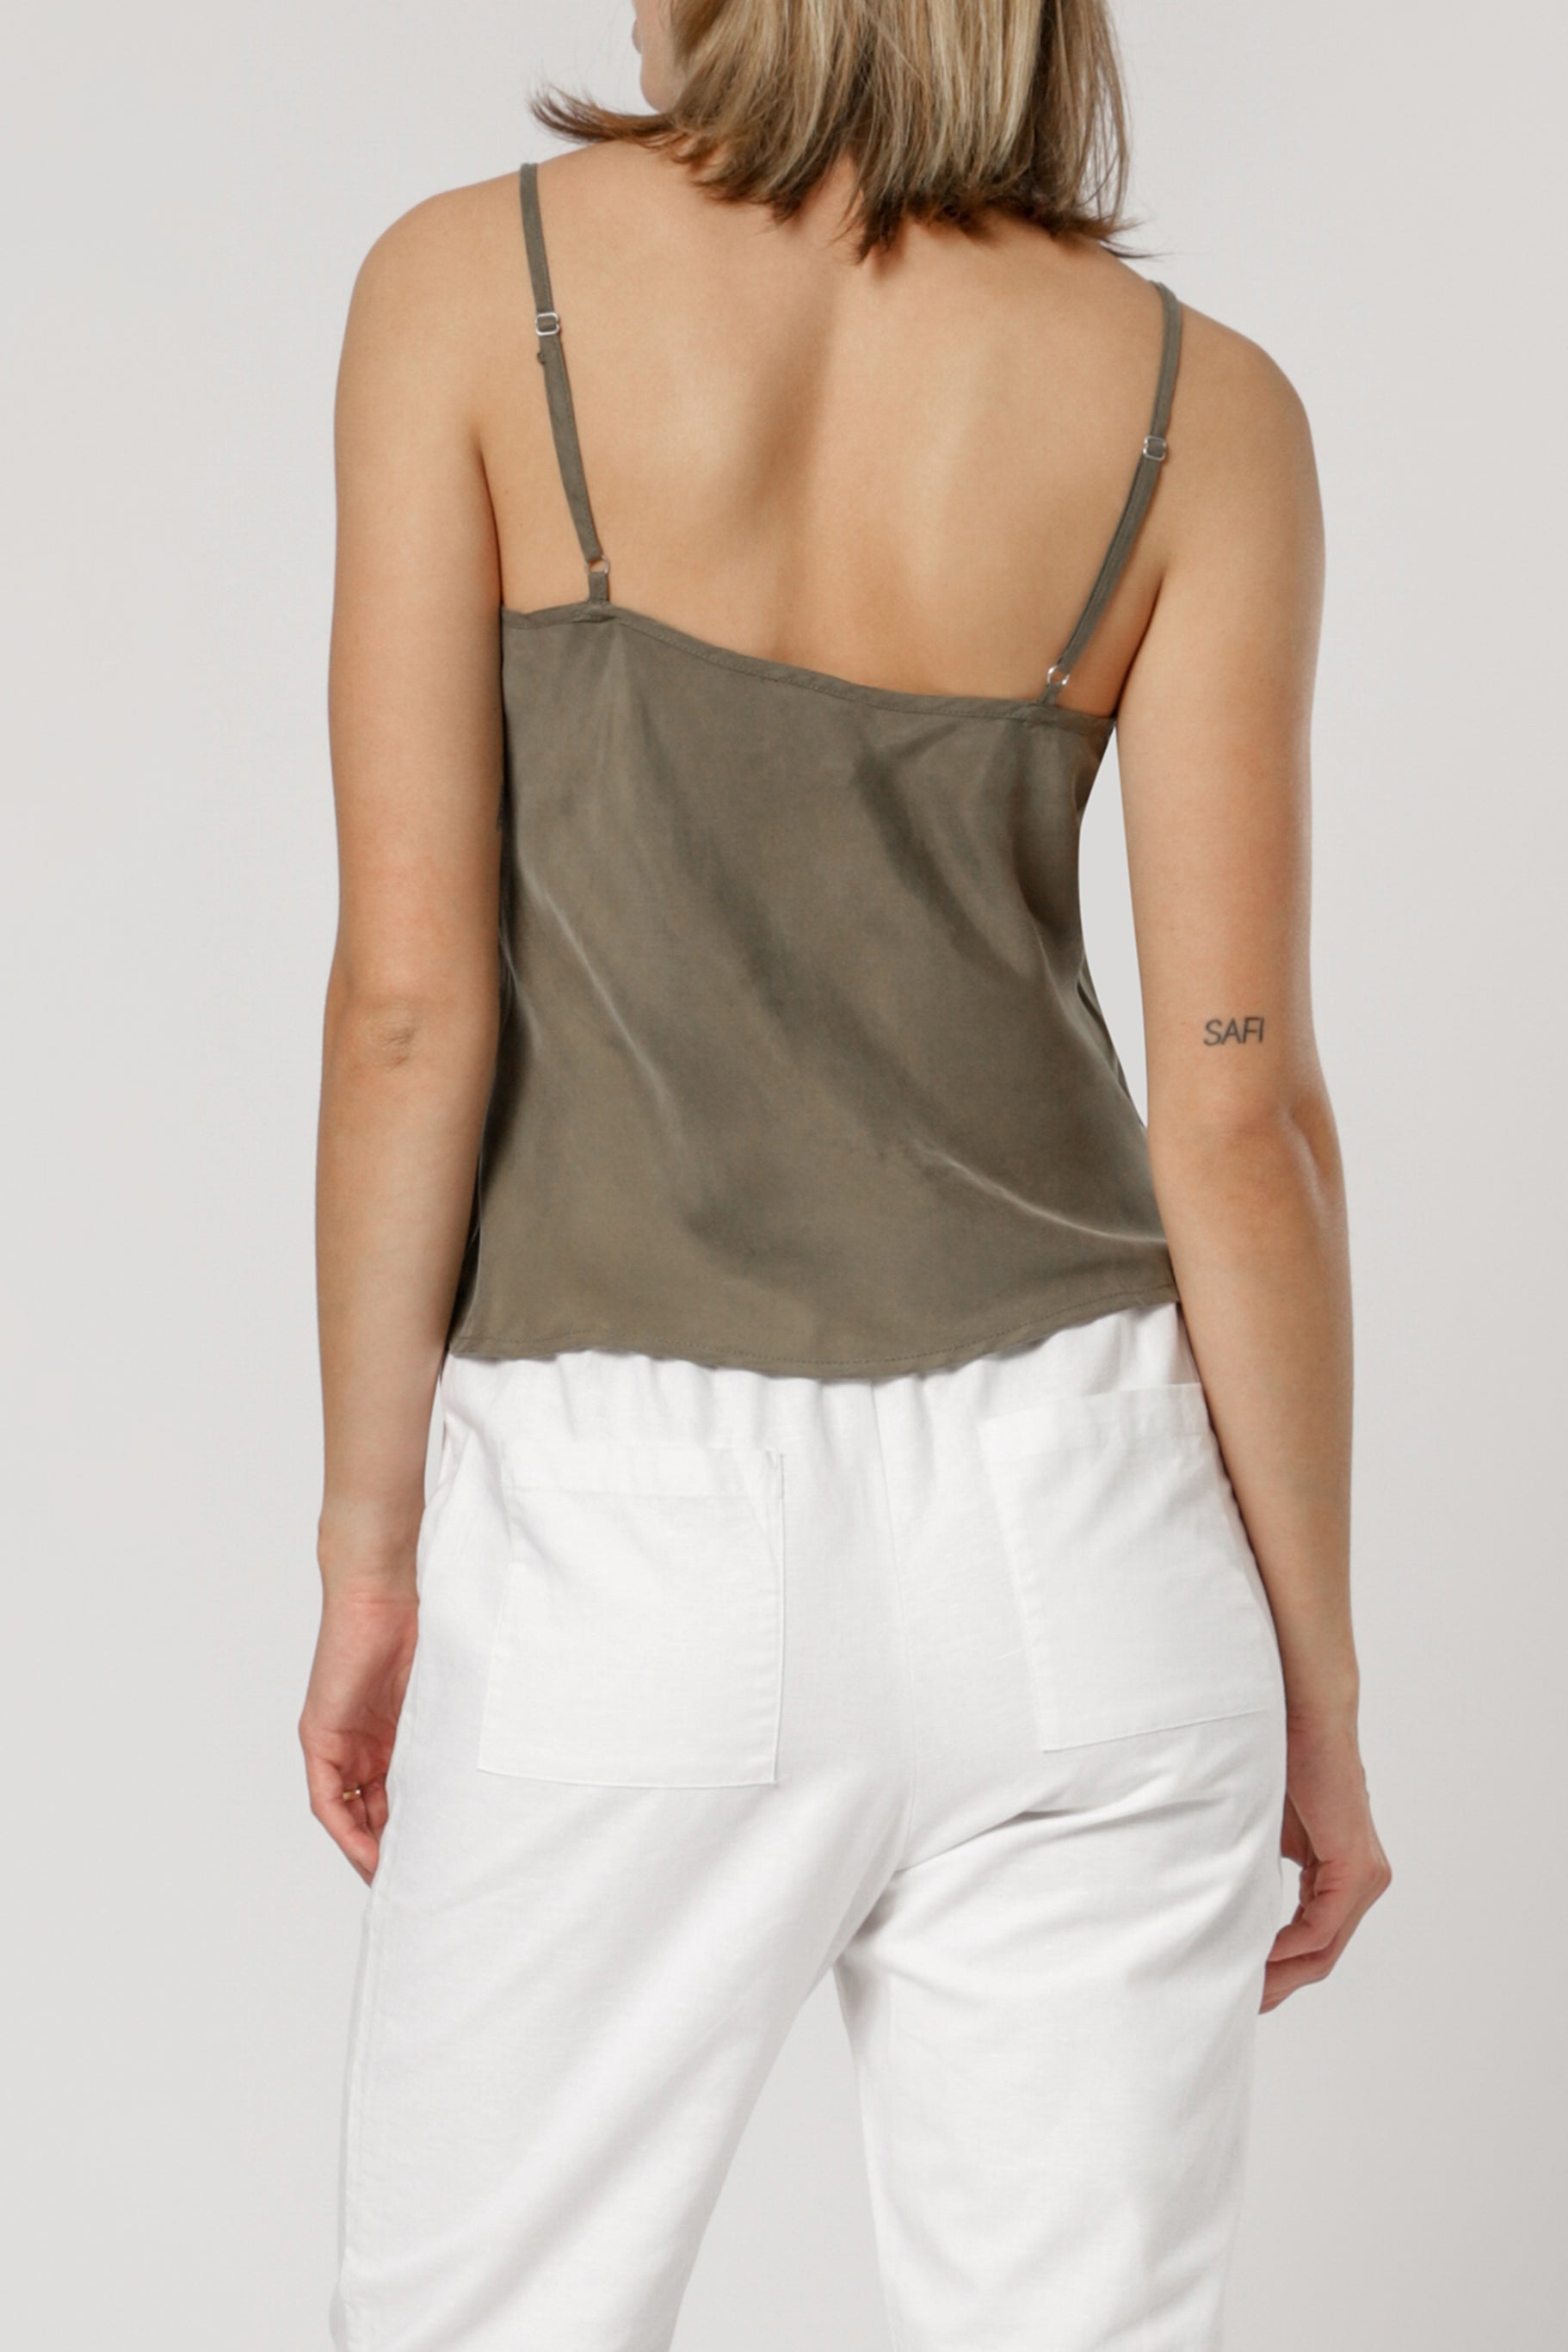 Nude Lucy nude classic cami moss top